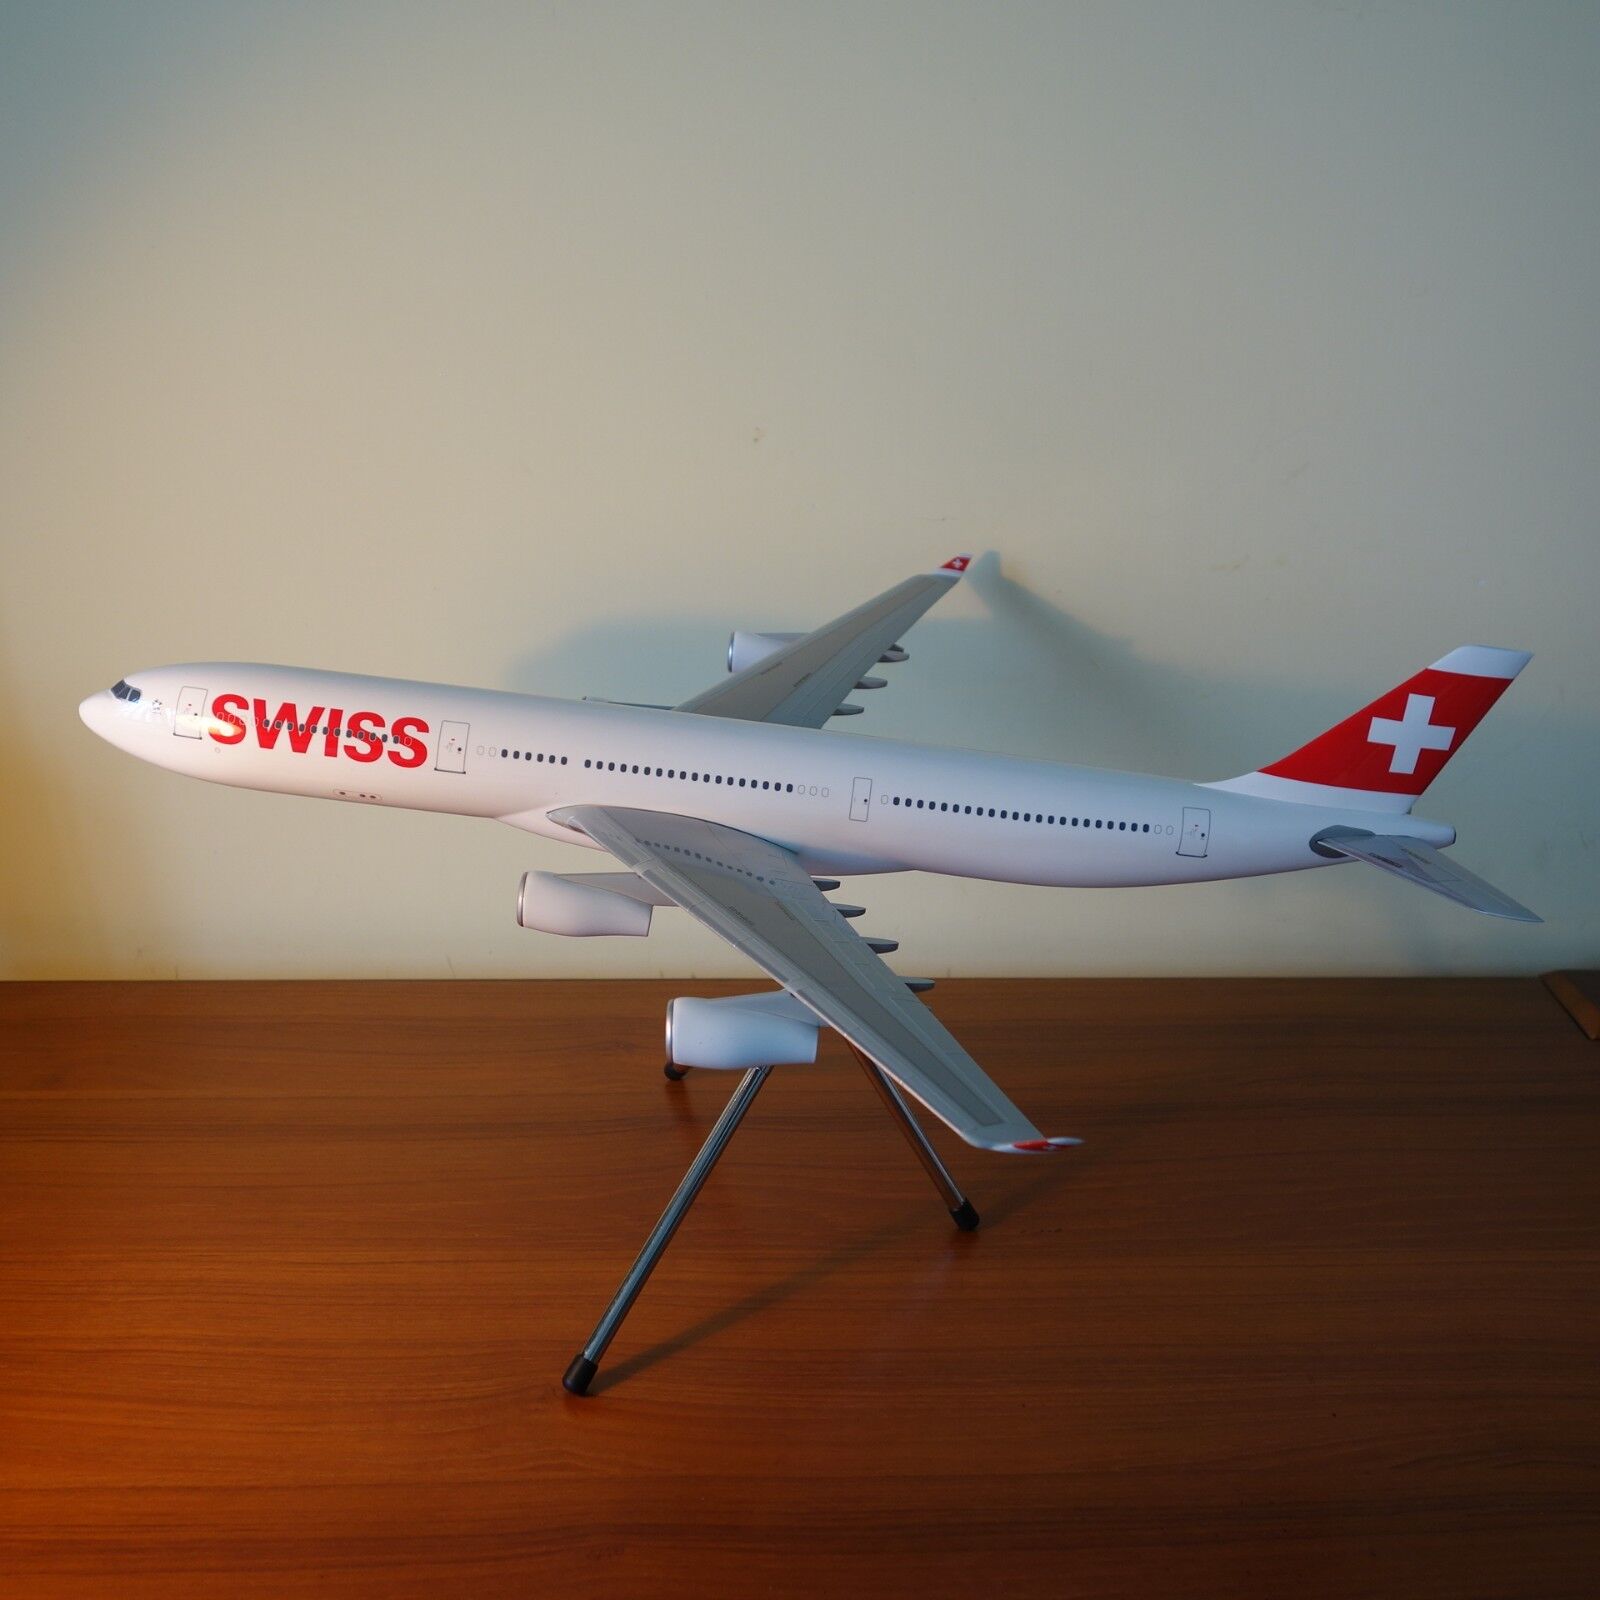 Large 1/120 Swiss Air Airbus A340-300 Airplane Model with delux stand New Color